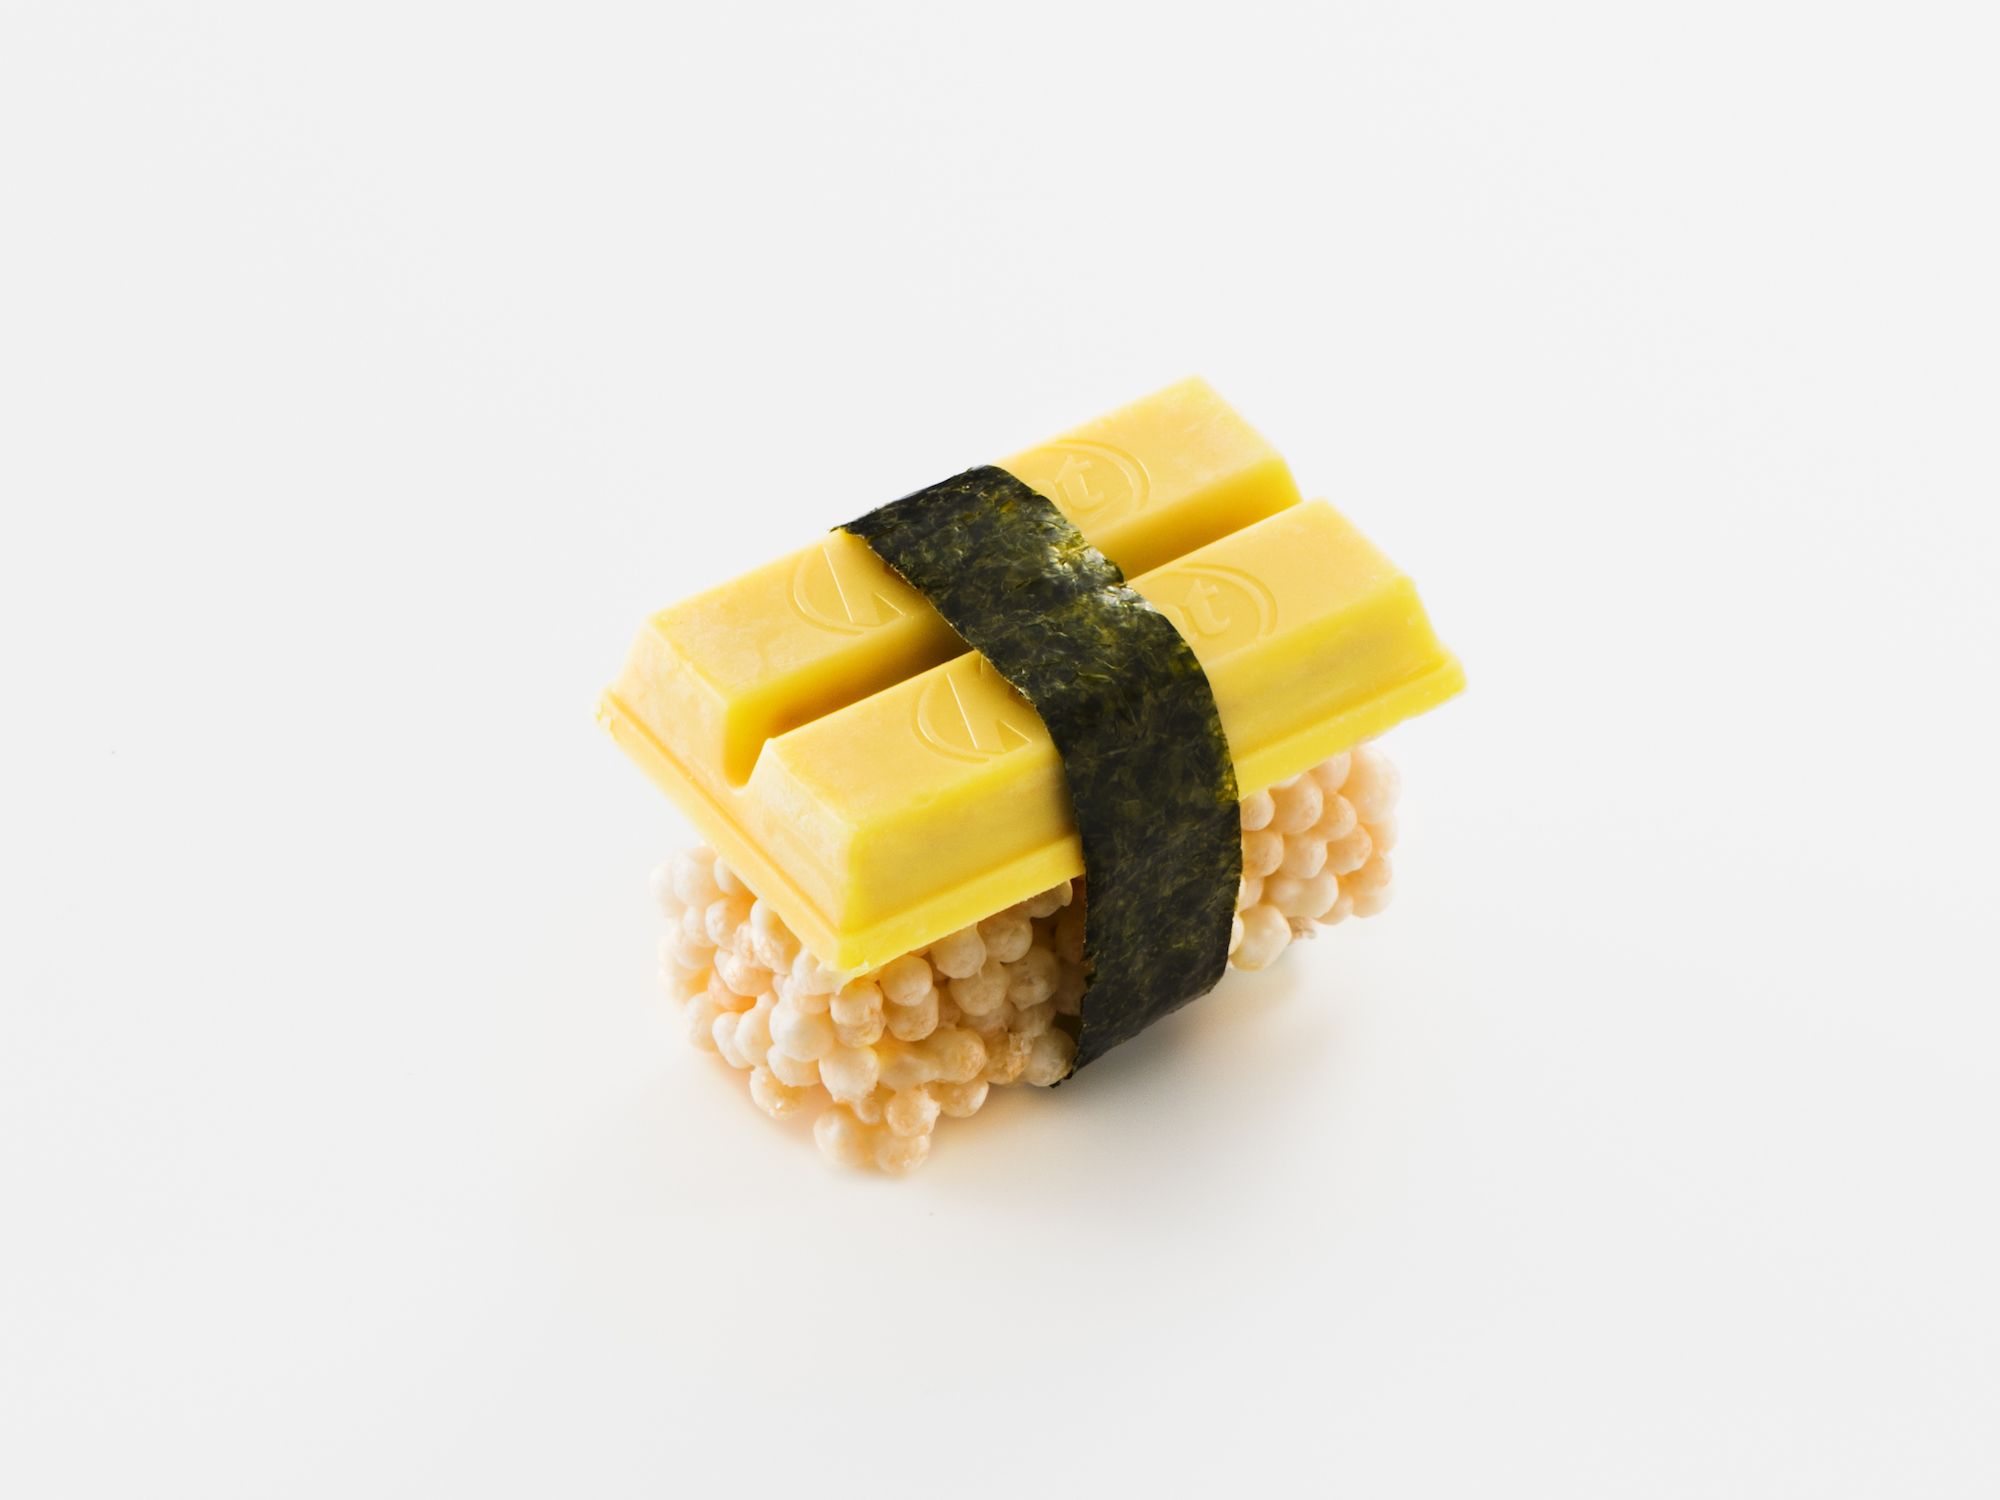 Kit Kat sushi is all of our cravings wrapped into one, for better or worse